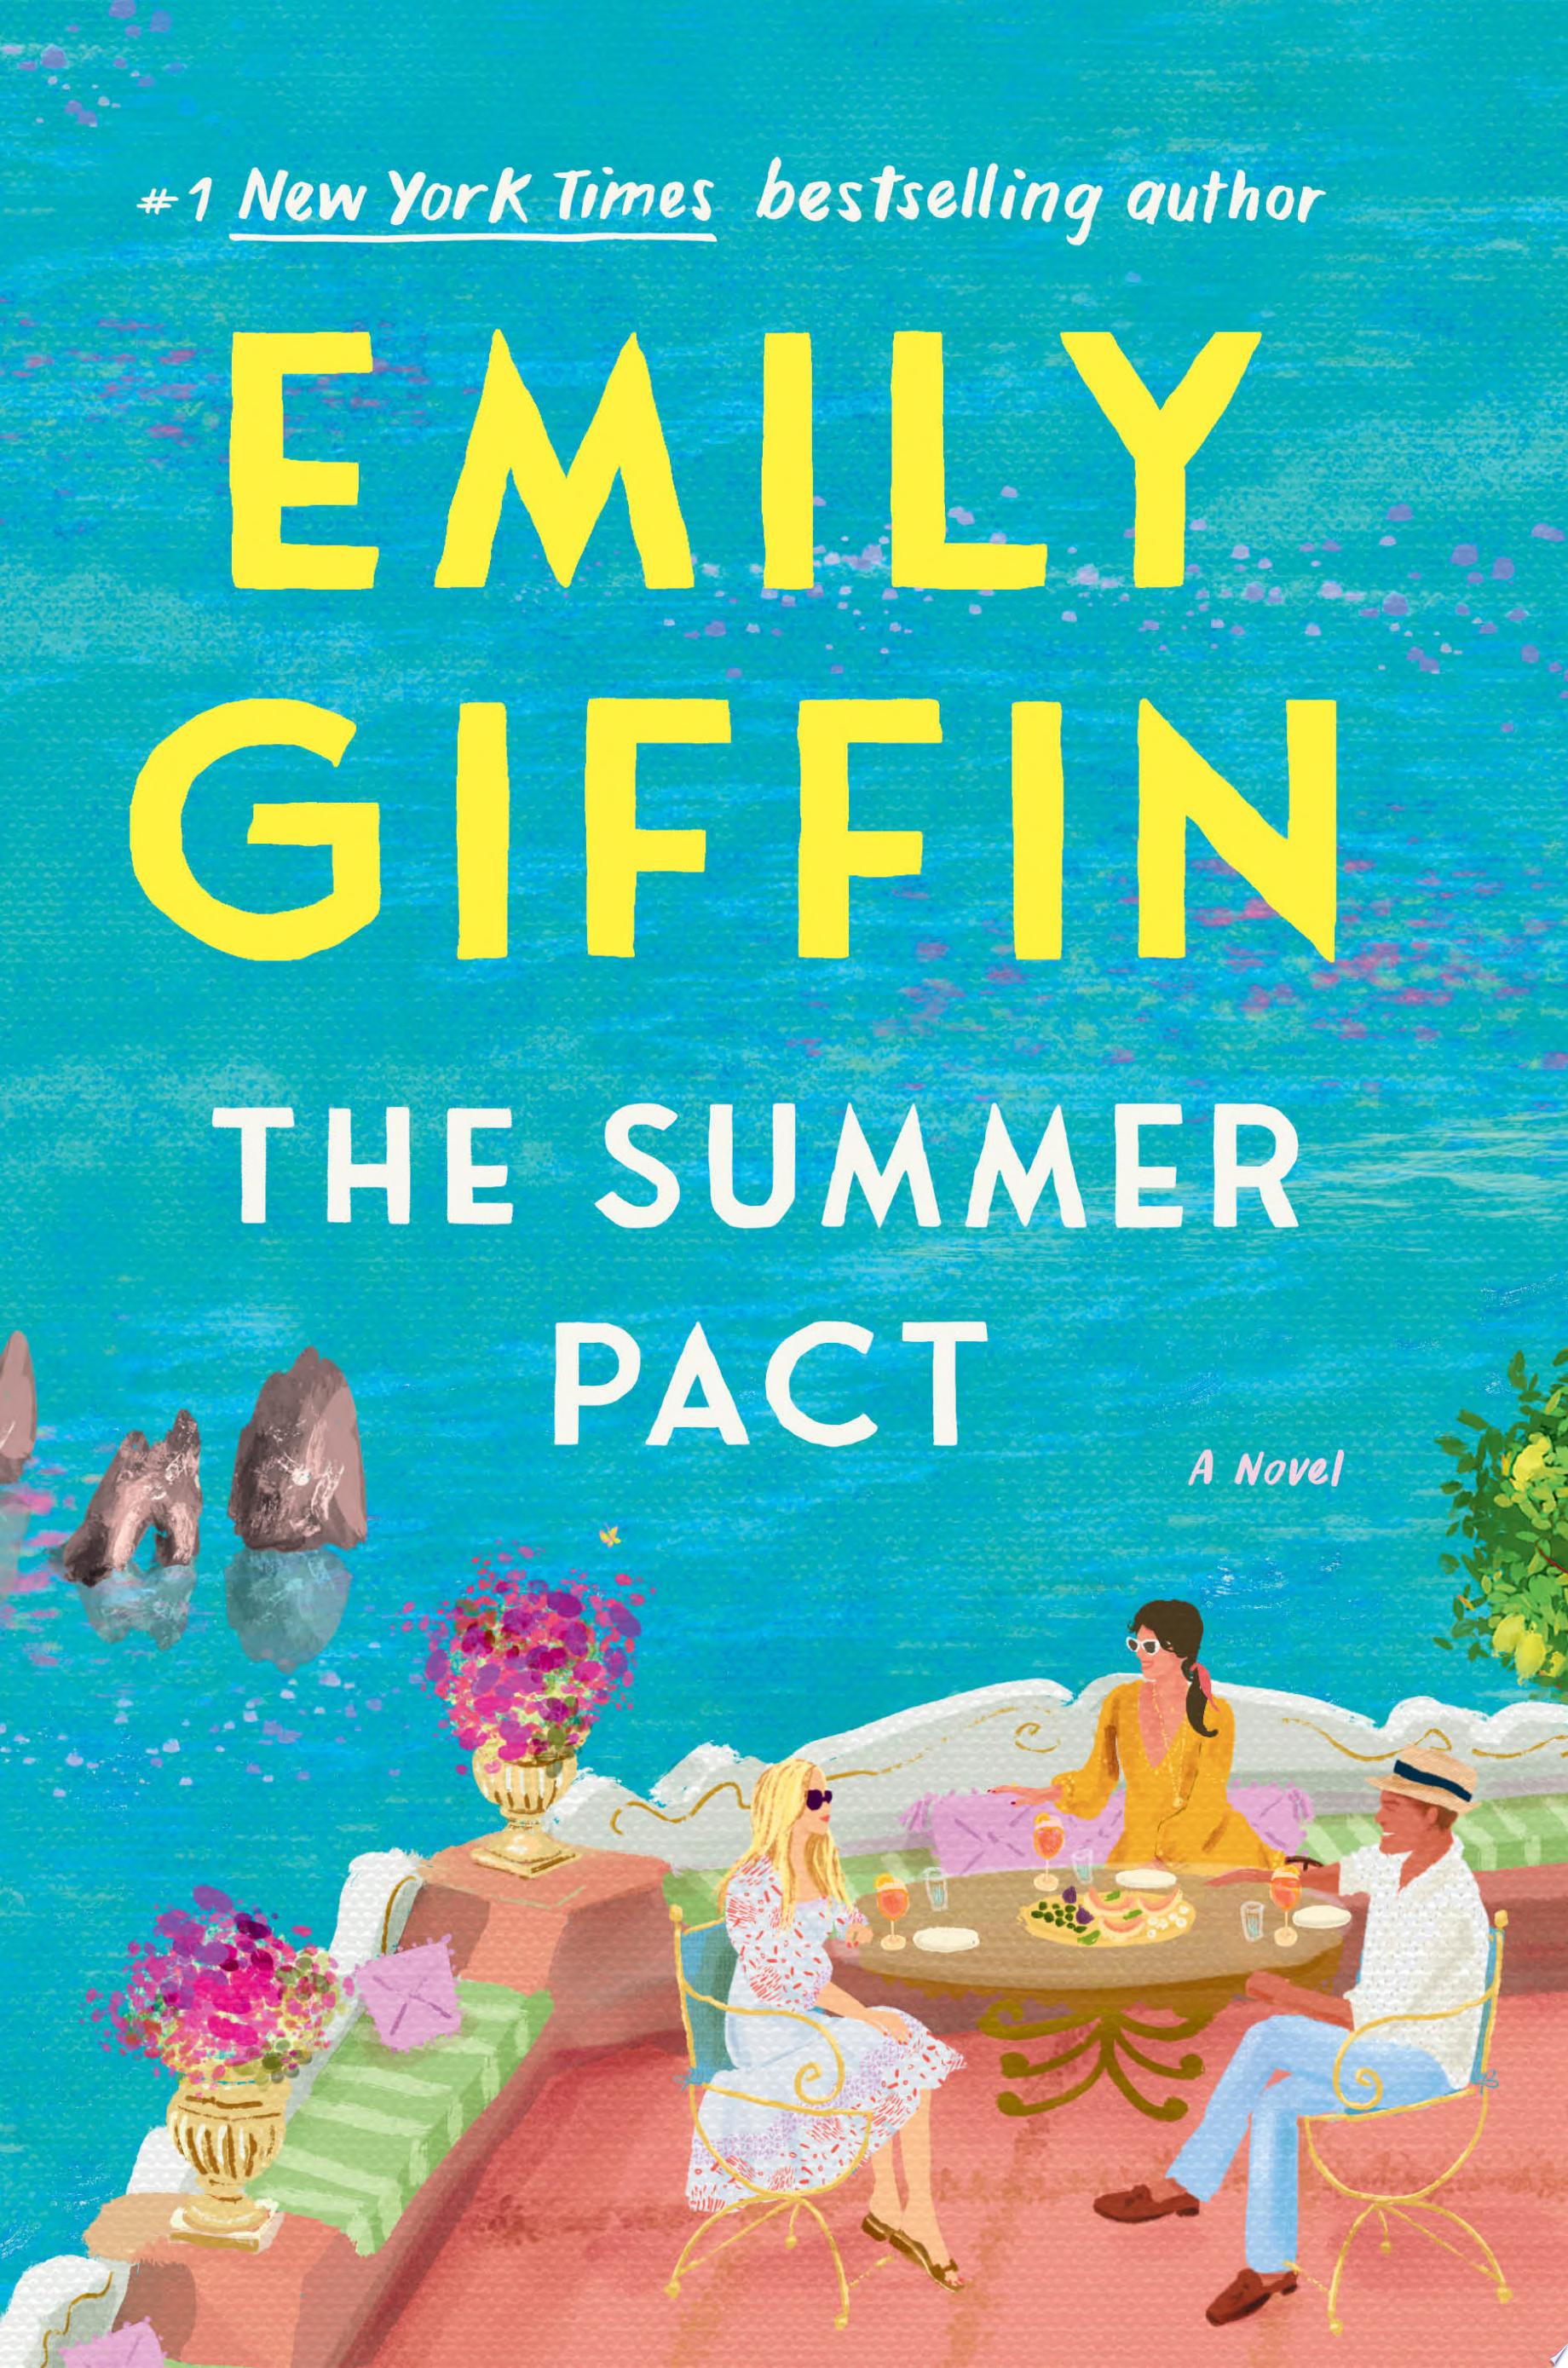 Image for "The Summer Pact"